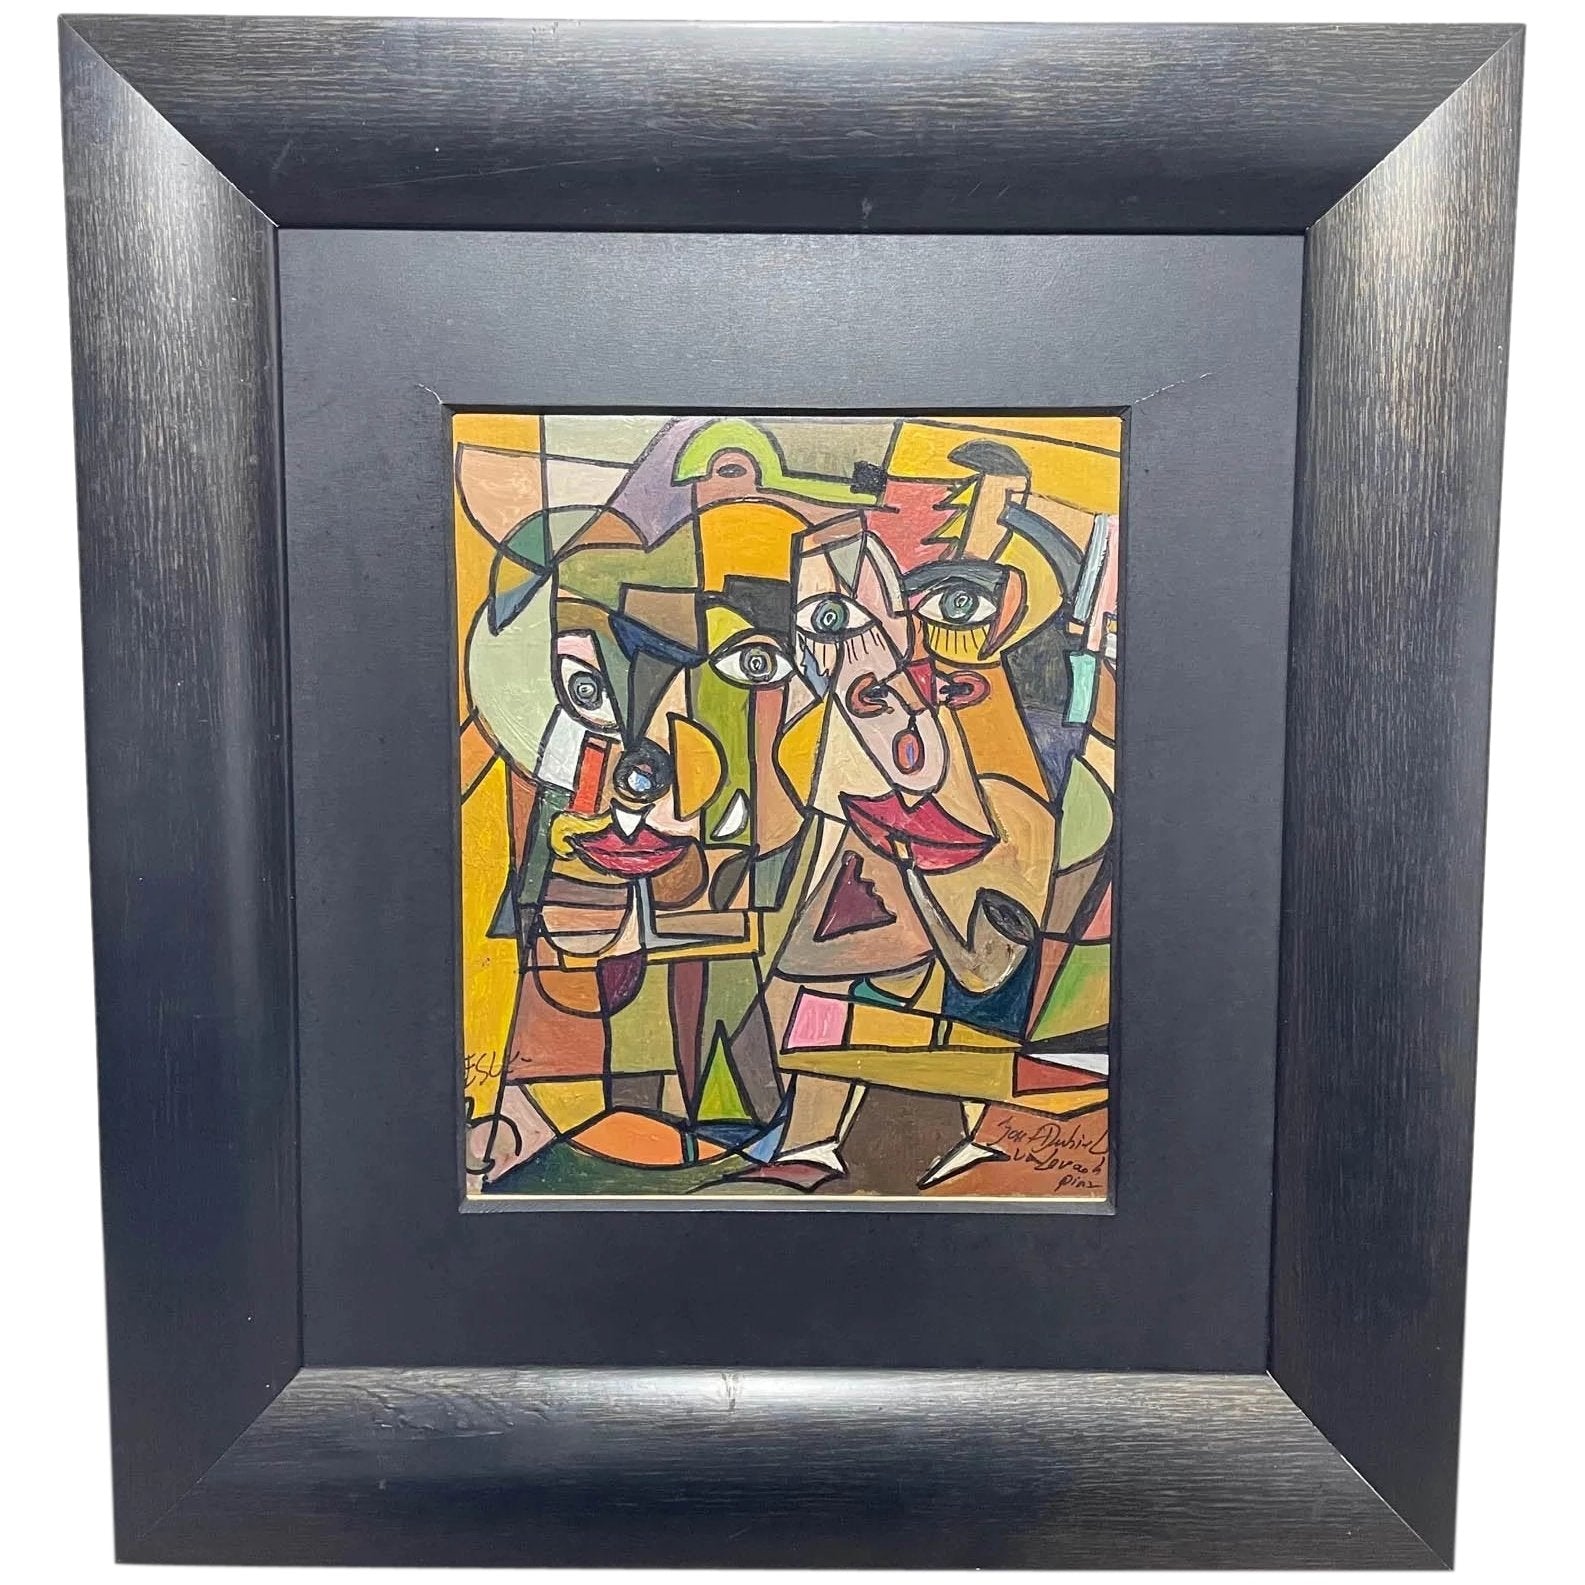 Contemporary Oil Painting Cubism "Composition Of Figures" Picasso Influence - Cheshire Antiques Consultant